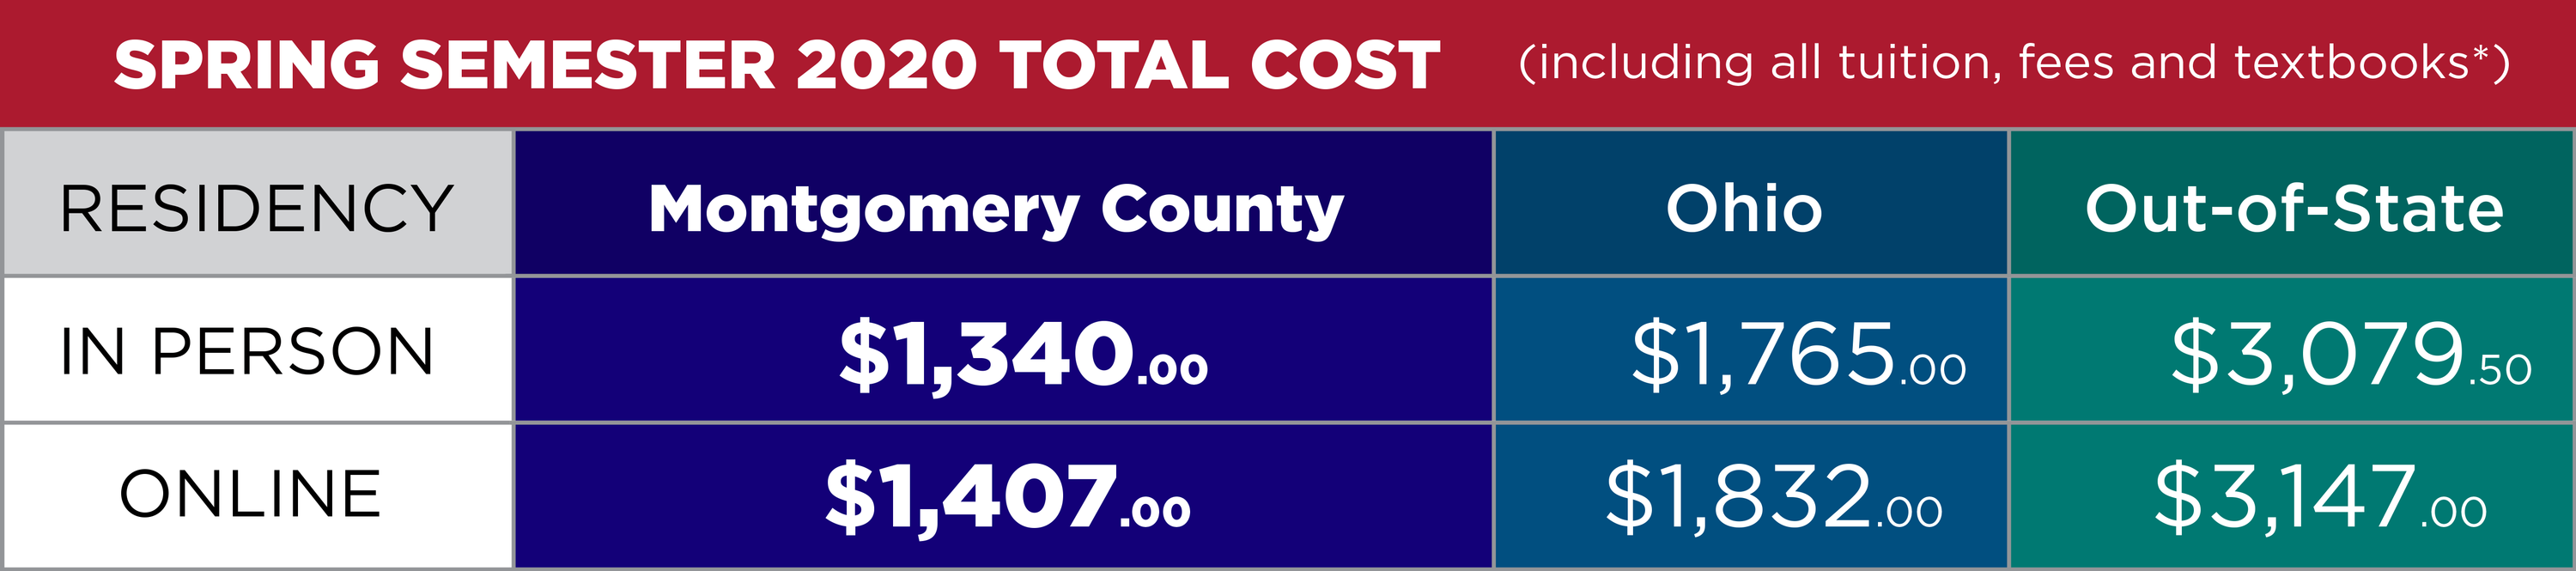 Spring Semester 2019 Total Cost (including all tuition, fees and textbooks*) Montgomery County Residents: In Person $1,211.98, Online $1,279.48 Other Ohio Residents: In Person $1,637.38, Online $1,704.33 Out-of-State Students: In Person $2,862.31, Online $2,929.81